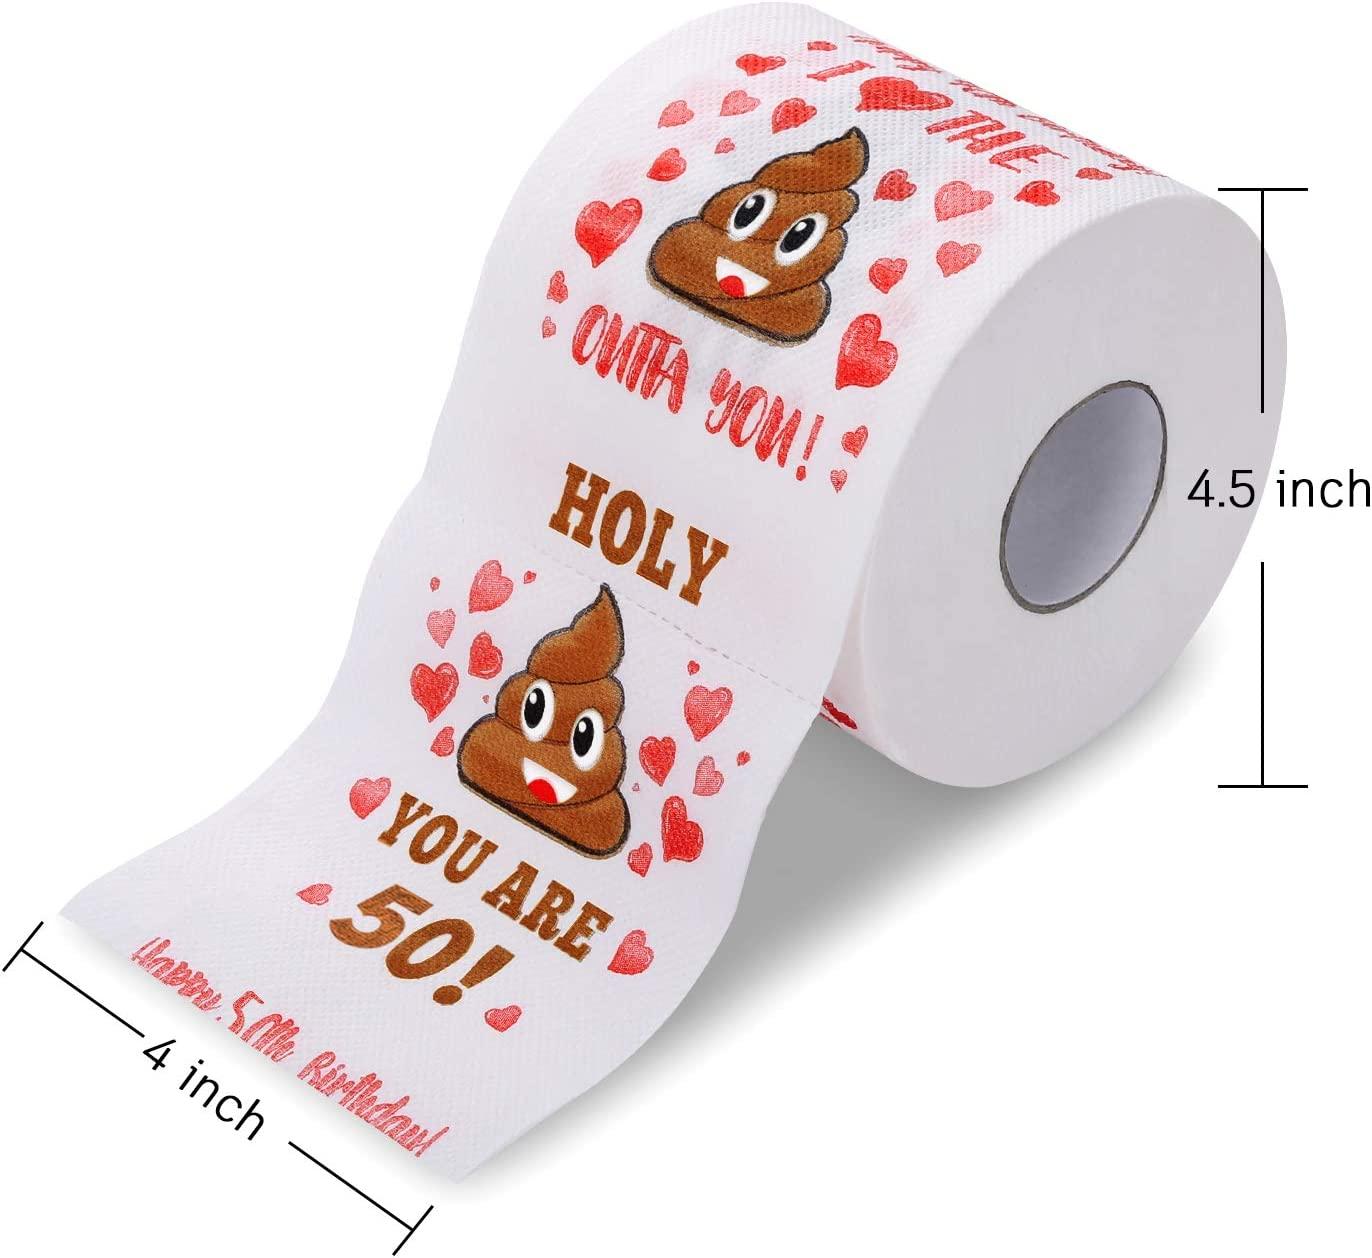 50th Birthday Gifts for Men and Women - Happy Prank Toilet Paper - 50th  Birthday Decorations for Him, Her - Party Supplies Favors Ideas - Funny Gag  Gifts, Novelty Bday Present for Friends, Family